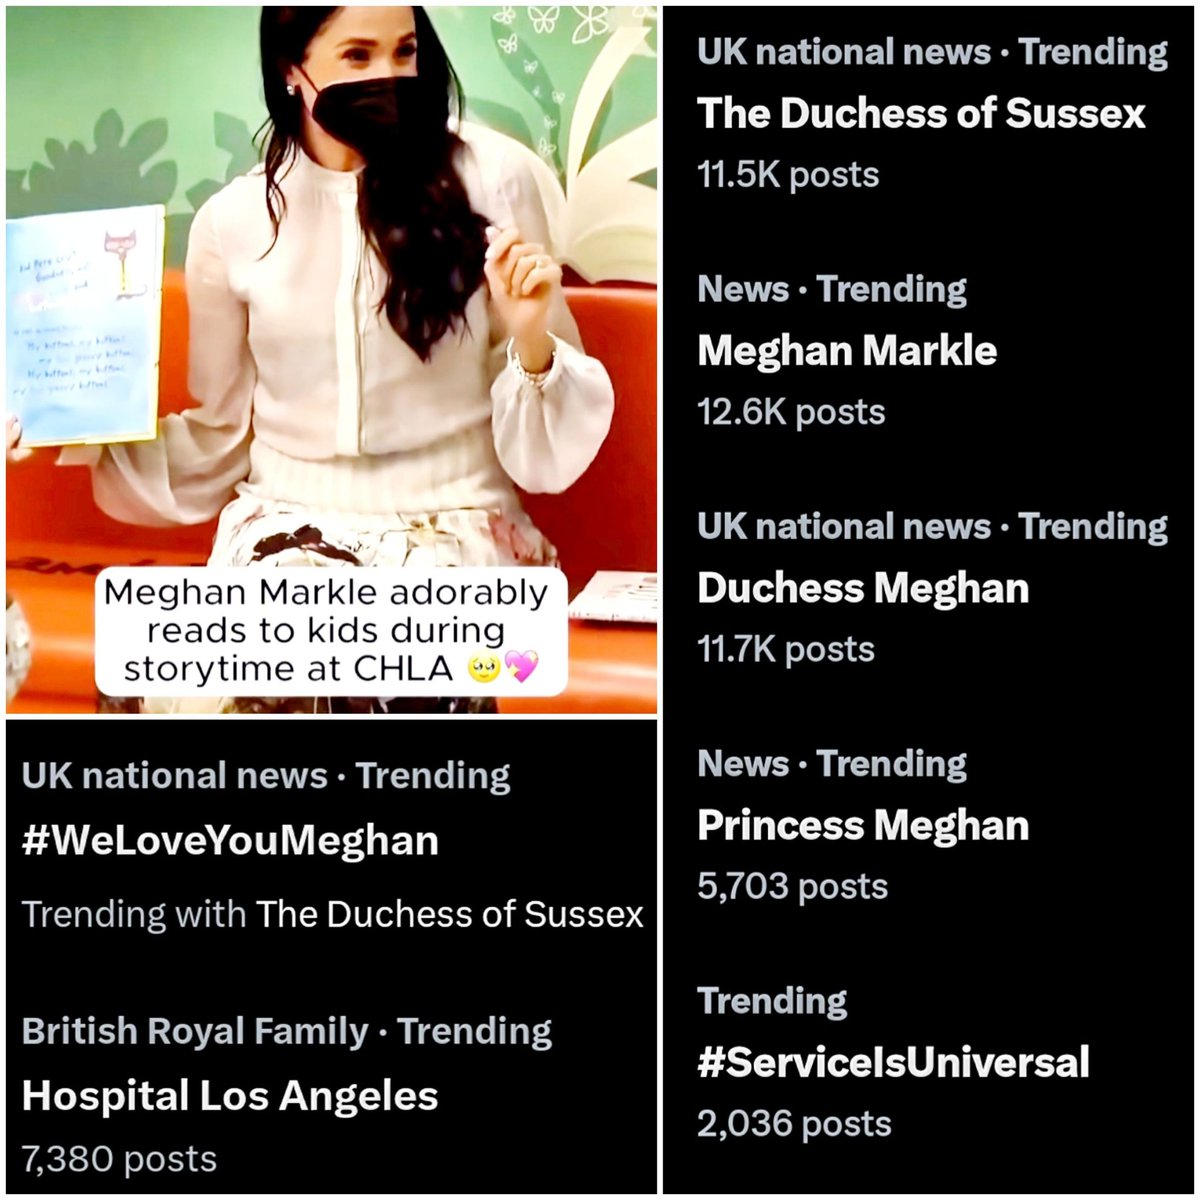 #PrincessMeghan: She lives in🇺🇸, but her news is trending in the🇬🇧. U can't keep a good & brave woman down!😂.